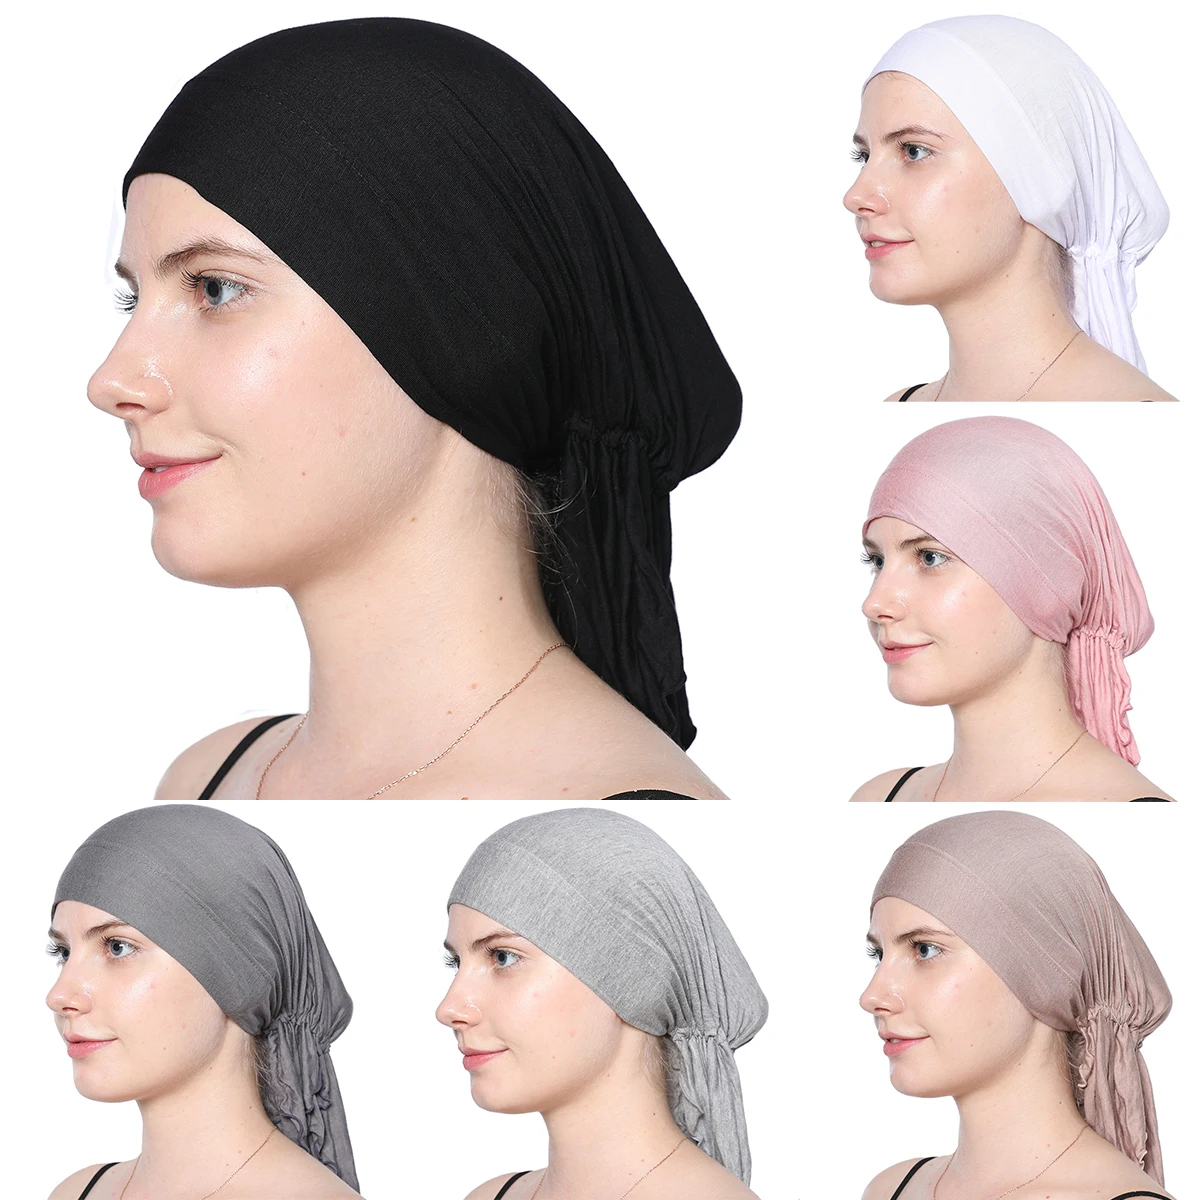  - Elastic Ruched Caps Stretch Mercerized Cotton Inner Hijab For Muslim Woman Plain Hijab Undercap Casual Ladies Bonnet One Size